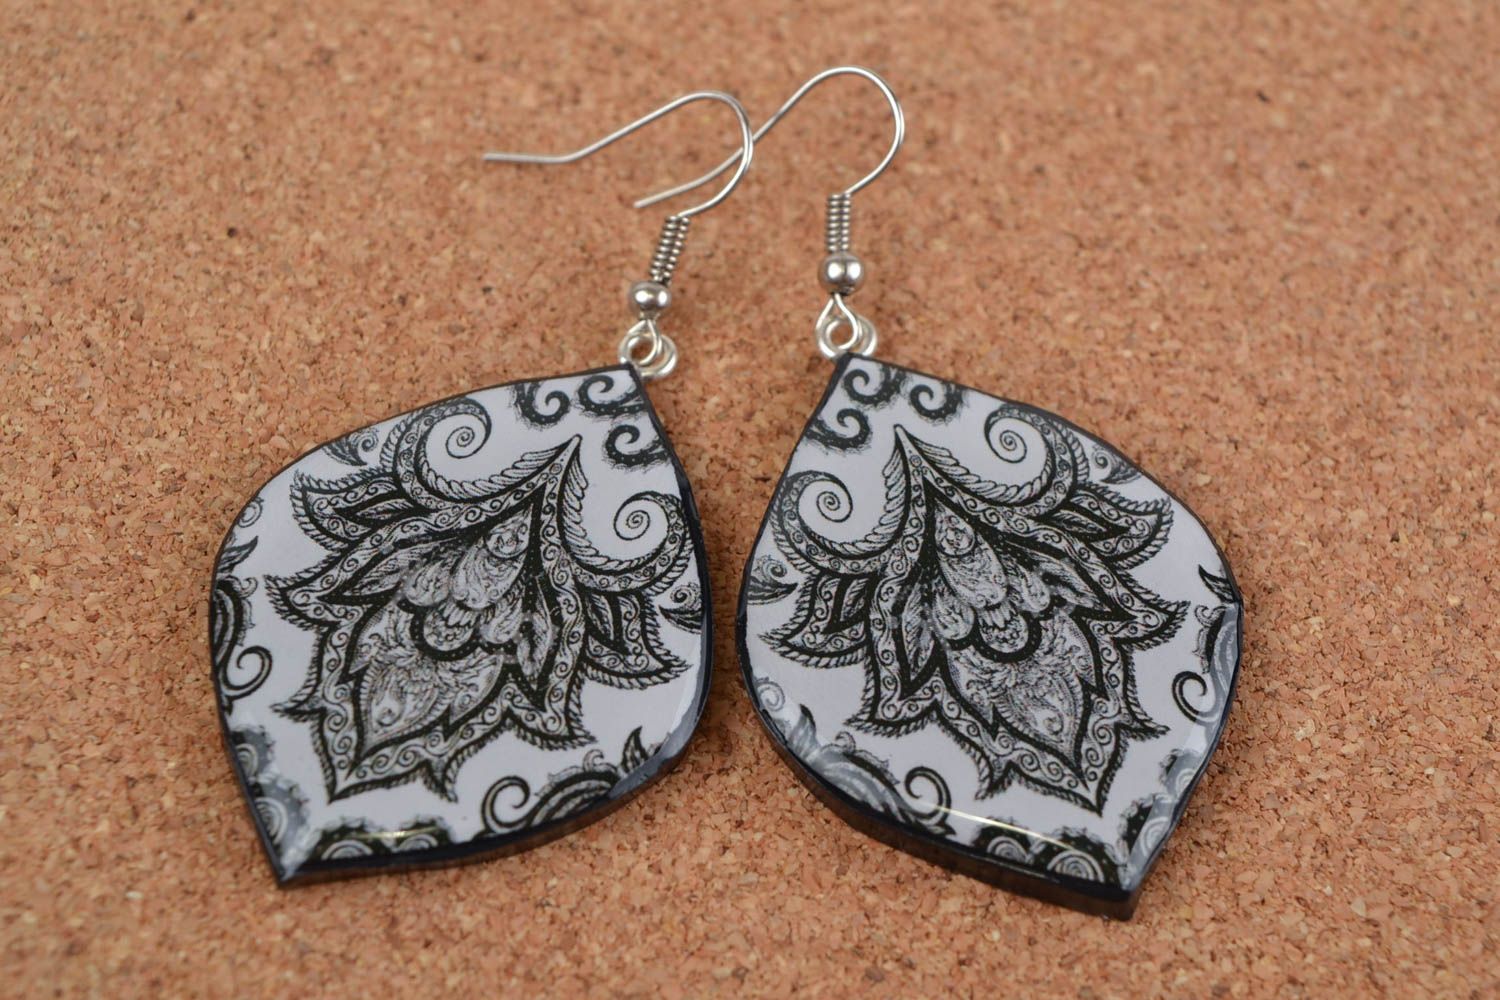 Handmade polymer clay decoupage earrings with black and white floral pattern photo 1